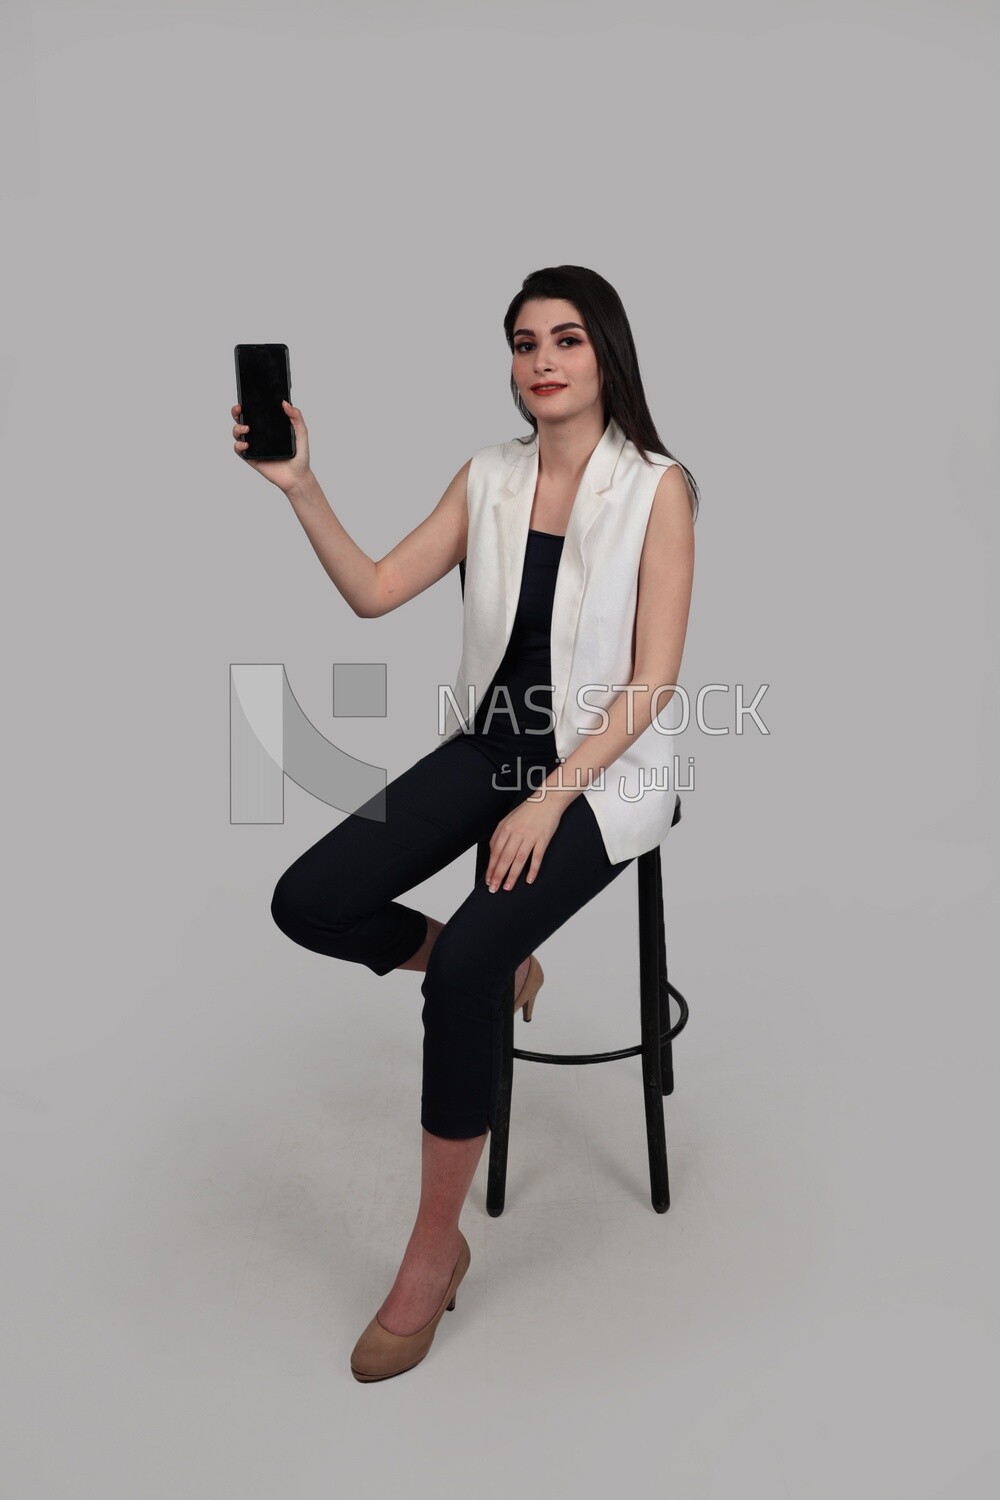 Photo of a businesswoman with formal wear holding a mobile phone, business development and partnerships, business meeting, Model